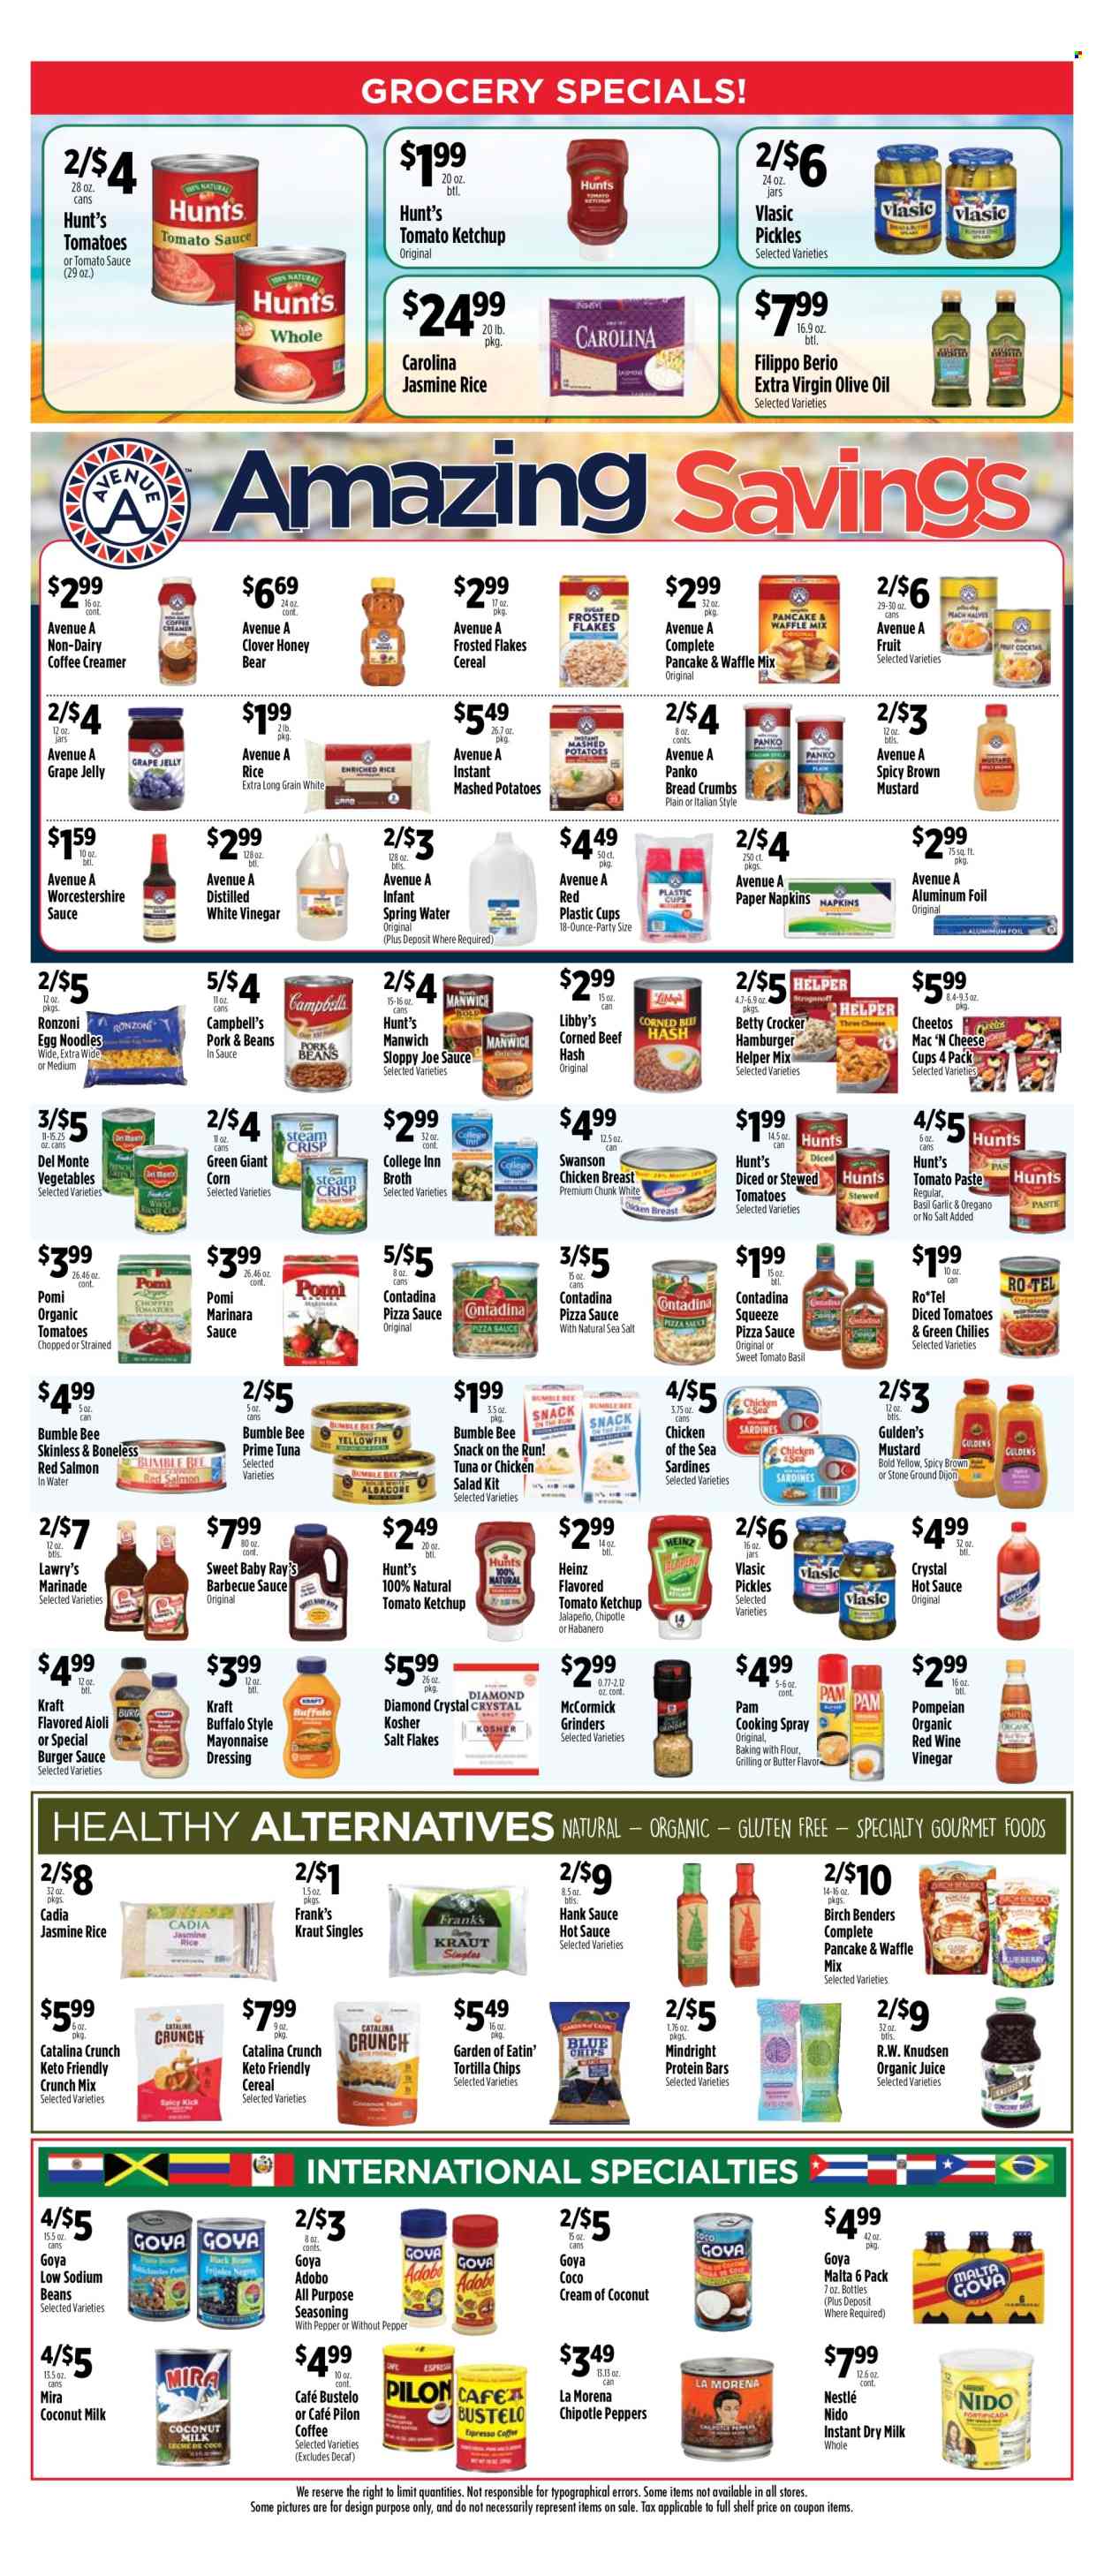 thumbnail - Pioneer Supermarkets Flyer - 07/21/2024 - 07/27/2024 - Sales products - breadcrumbs, panko breadcrumbs, pancake mix, jalapeño, sardines, tuna, beef hash, Campbell's, mashed potatoes, Bumble Bee, noodles, Kraft®, chicken salad, ready meal, chicken breasts, meat salad, corned beef, cheese cup, snack bar, plant-based milk, creamer, coffee and tea creamer, mayonnaise, Nestlé, tortilla chips, Cheetos, chips, broth, canned tomatoes, coconut milk, tomato paste, tomato sauce, Heinz, pickles, canned vegetables, tomatoes & green chilies, Chicken of the Sea, Goya, Manwich, diced tomatoes, Del Monte, canned fish, pizza sauce, pickled vegetables, cereals, protein bar, Frosted Flakes, jasmine rice, egg noodles, spice, basil, seasoning, adobo sauce, BBQ sauce, mustard, worcestershire sauce, hot sauce, ketchup, marinade, cooking spray, extra virgin olive oil, wine vinegar, olive oil, grape jelly, juice, spring water, napkins, aluminium foil, jar, plastic cup. Page 2.